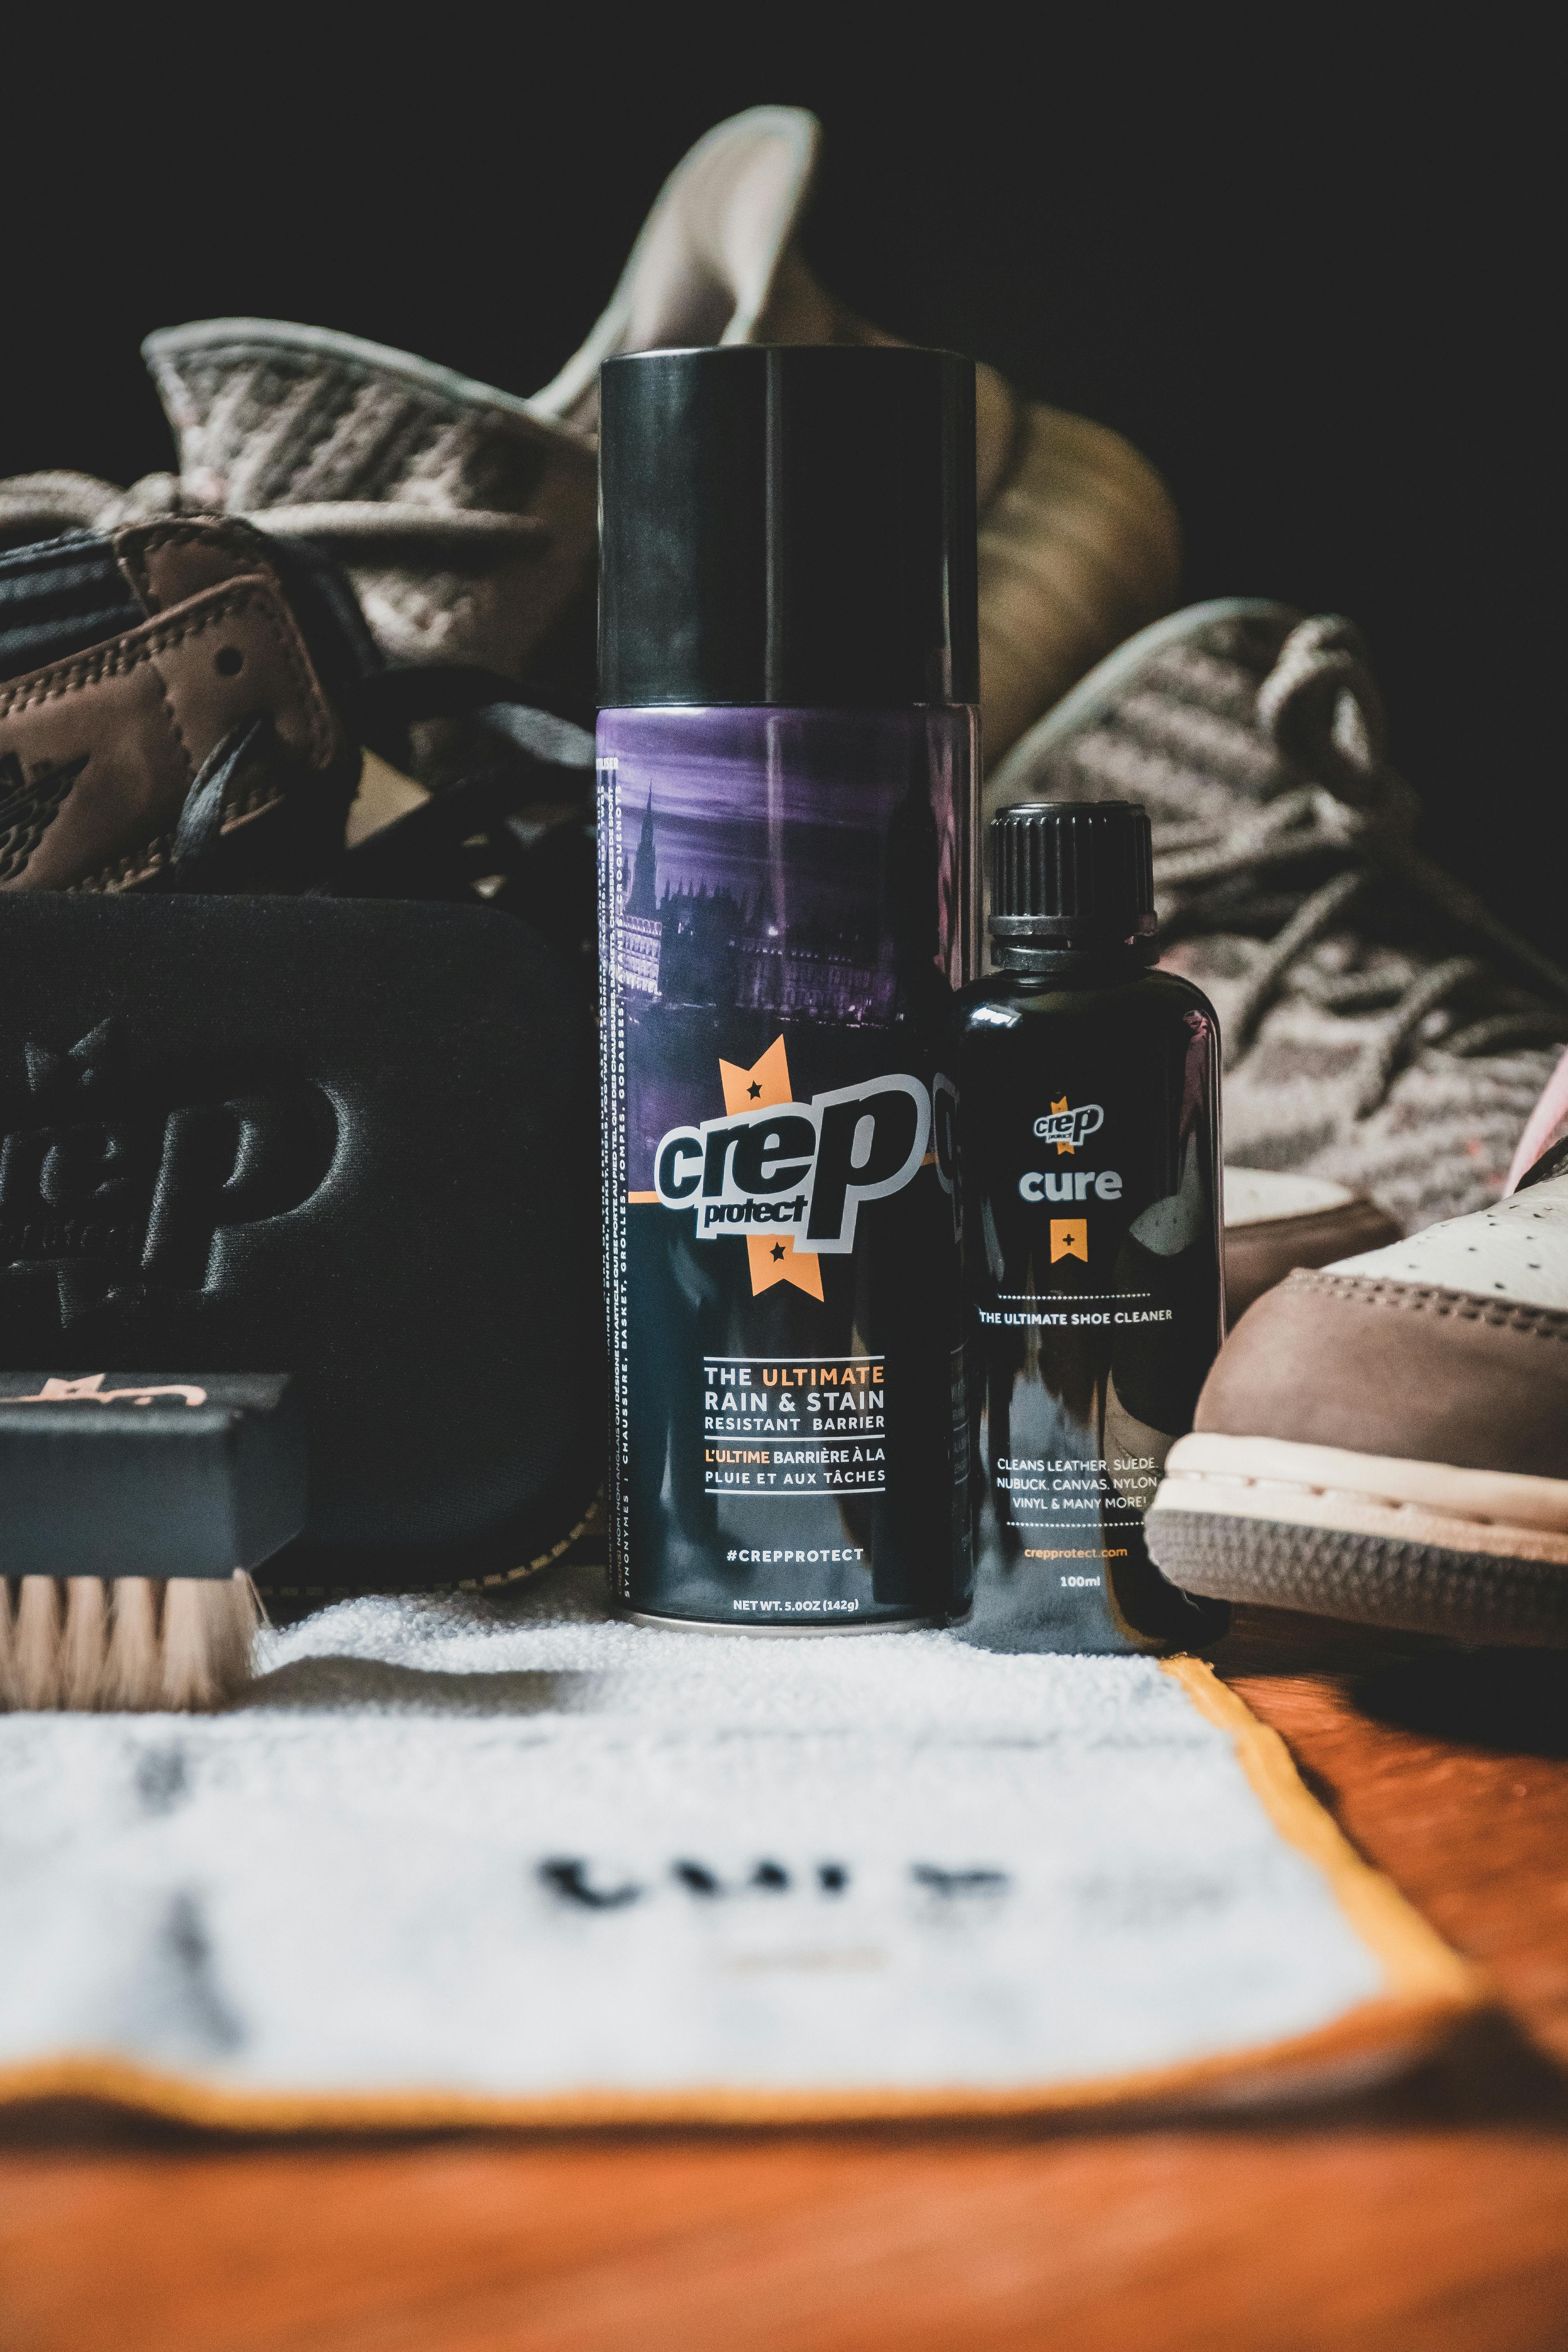 Crep Protect-water repellent spray for shoes - AliExpress